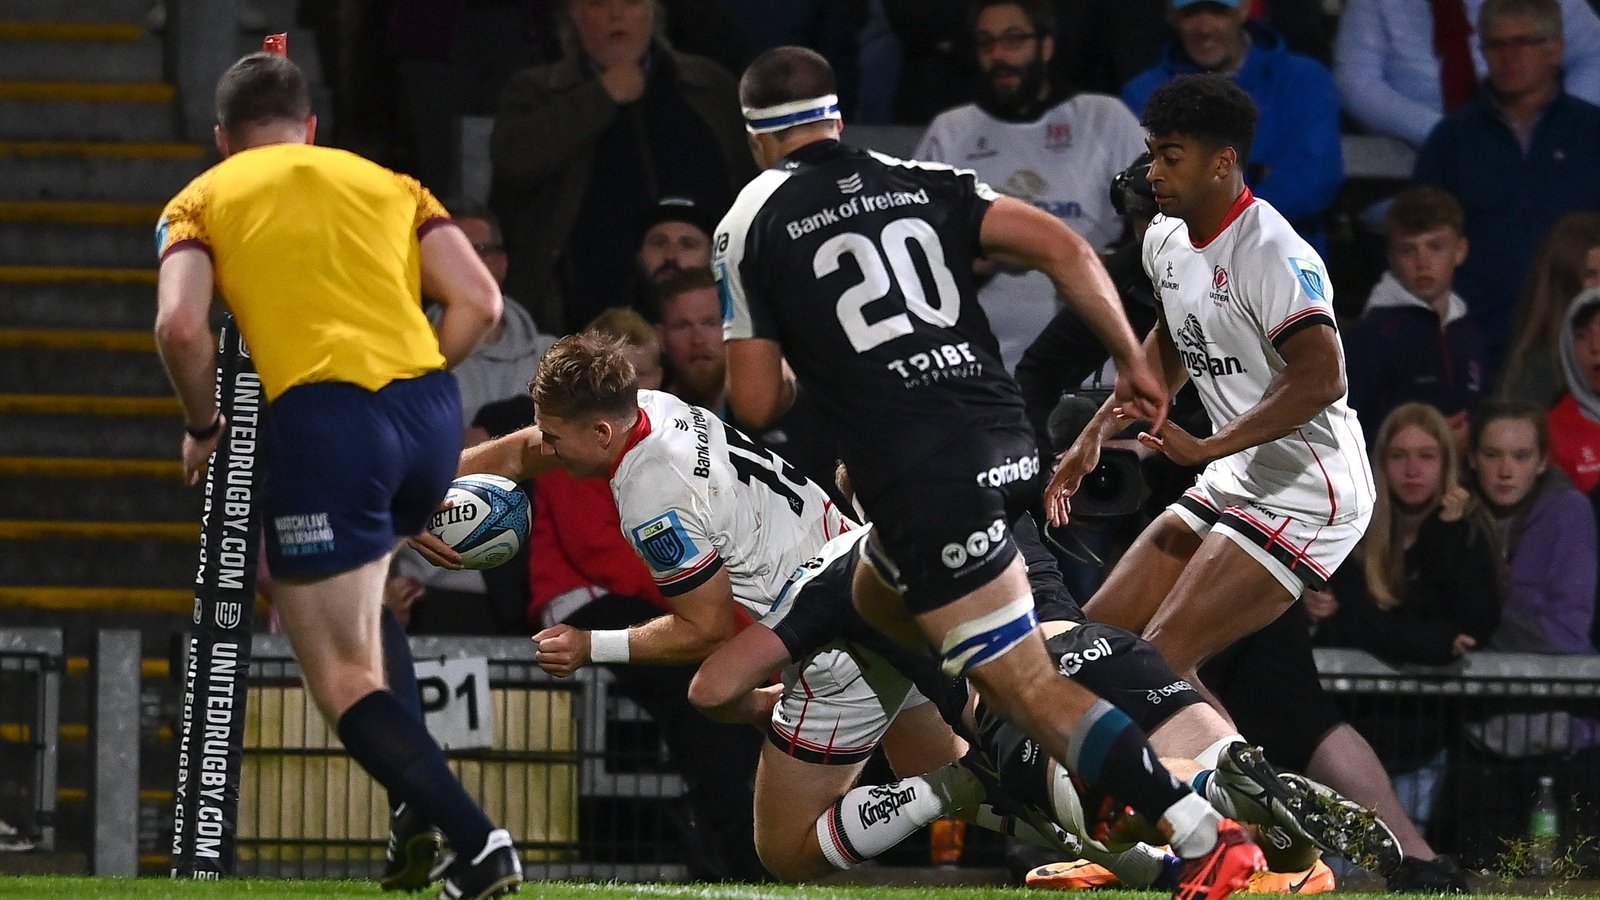 Ulster far too good for Connacht in scrappy interpro